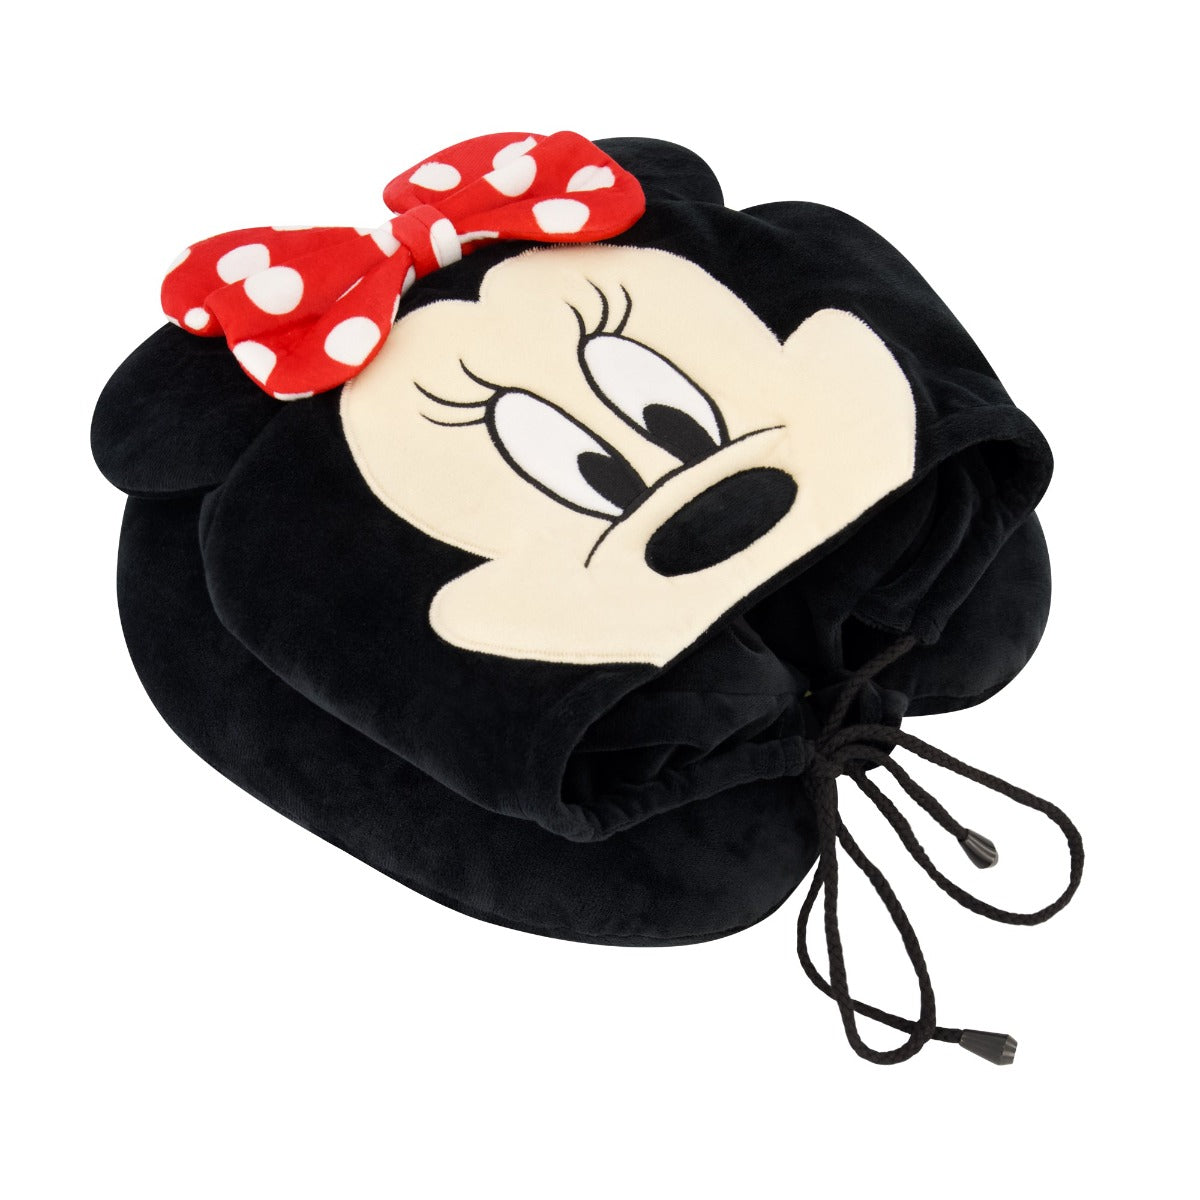 Black Ful Disney Minnie Mouse hooded hoodie travel pillow - best neck pillows for traveling